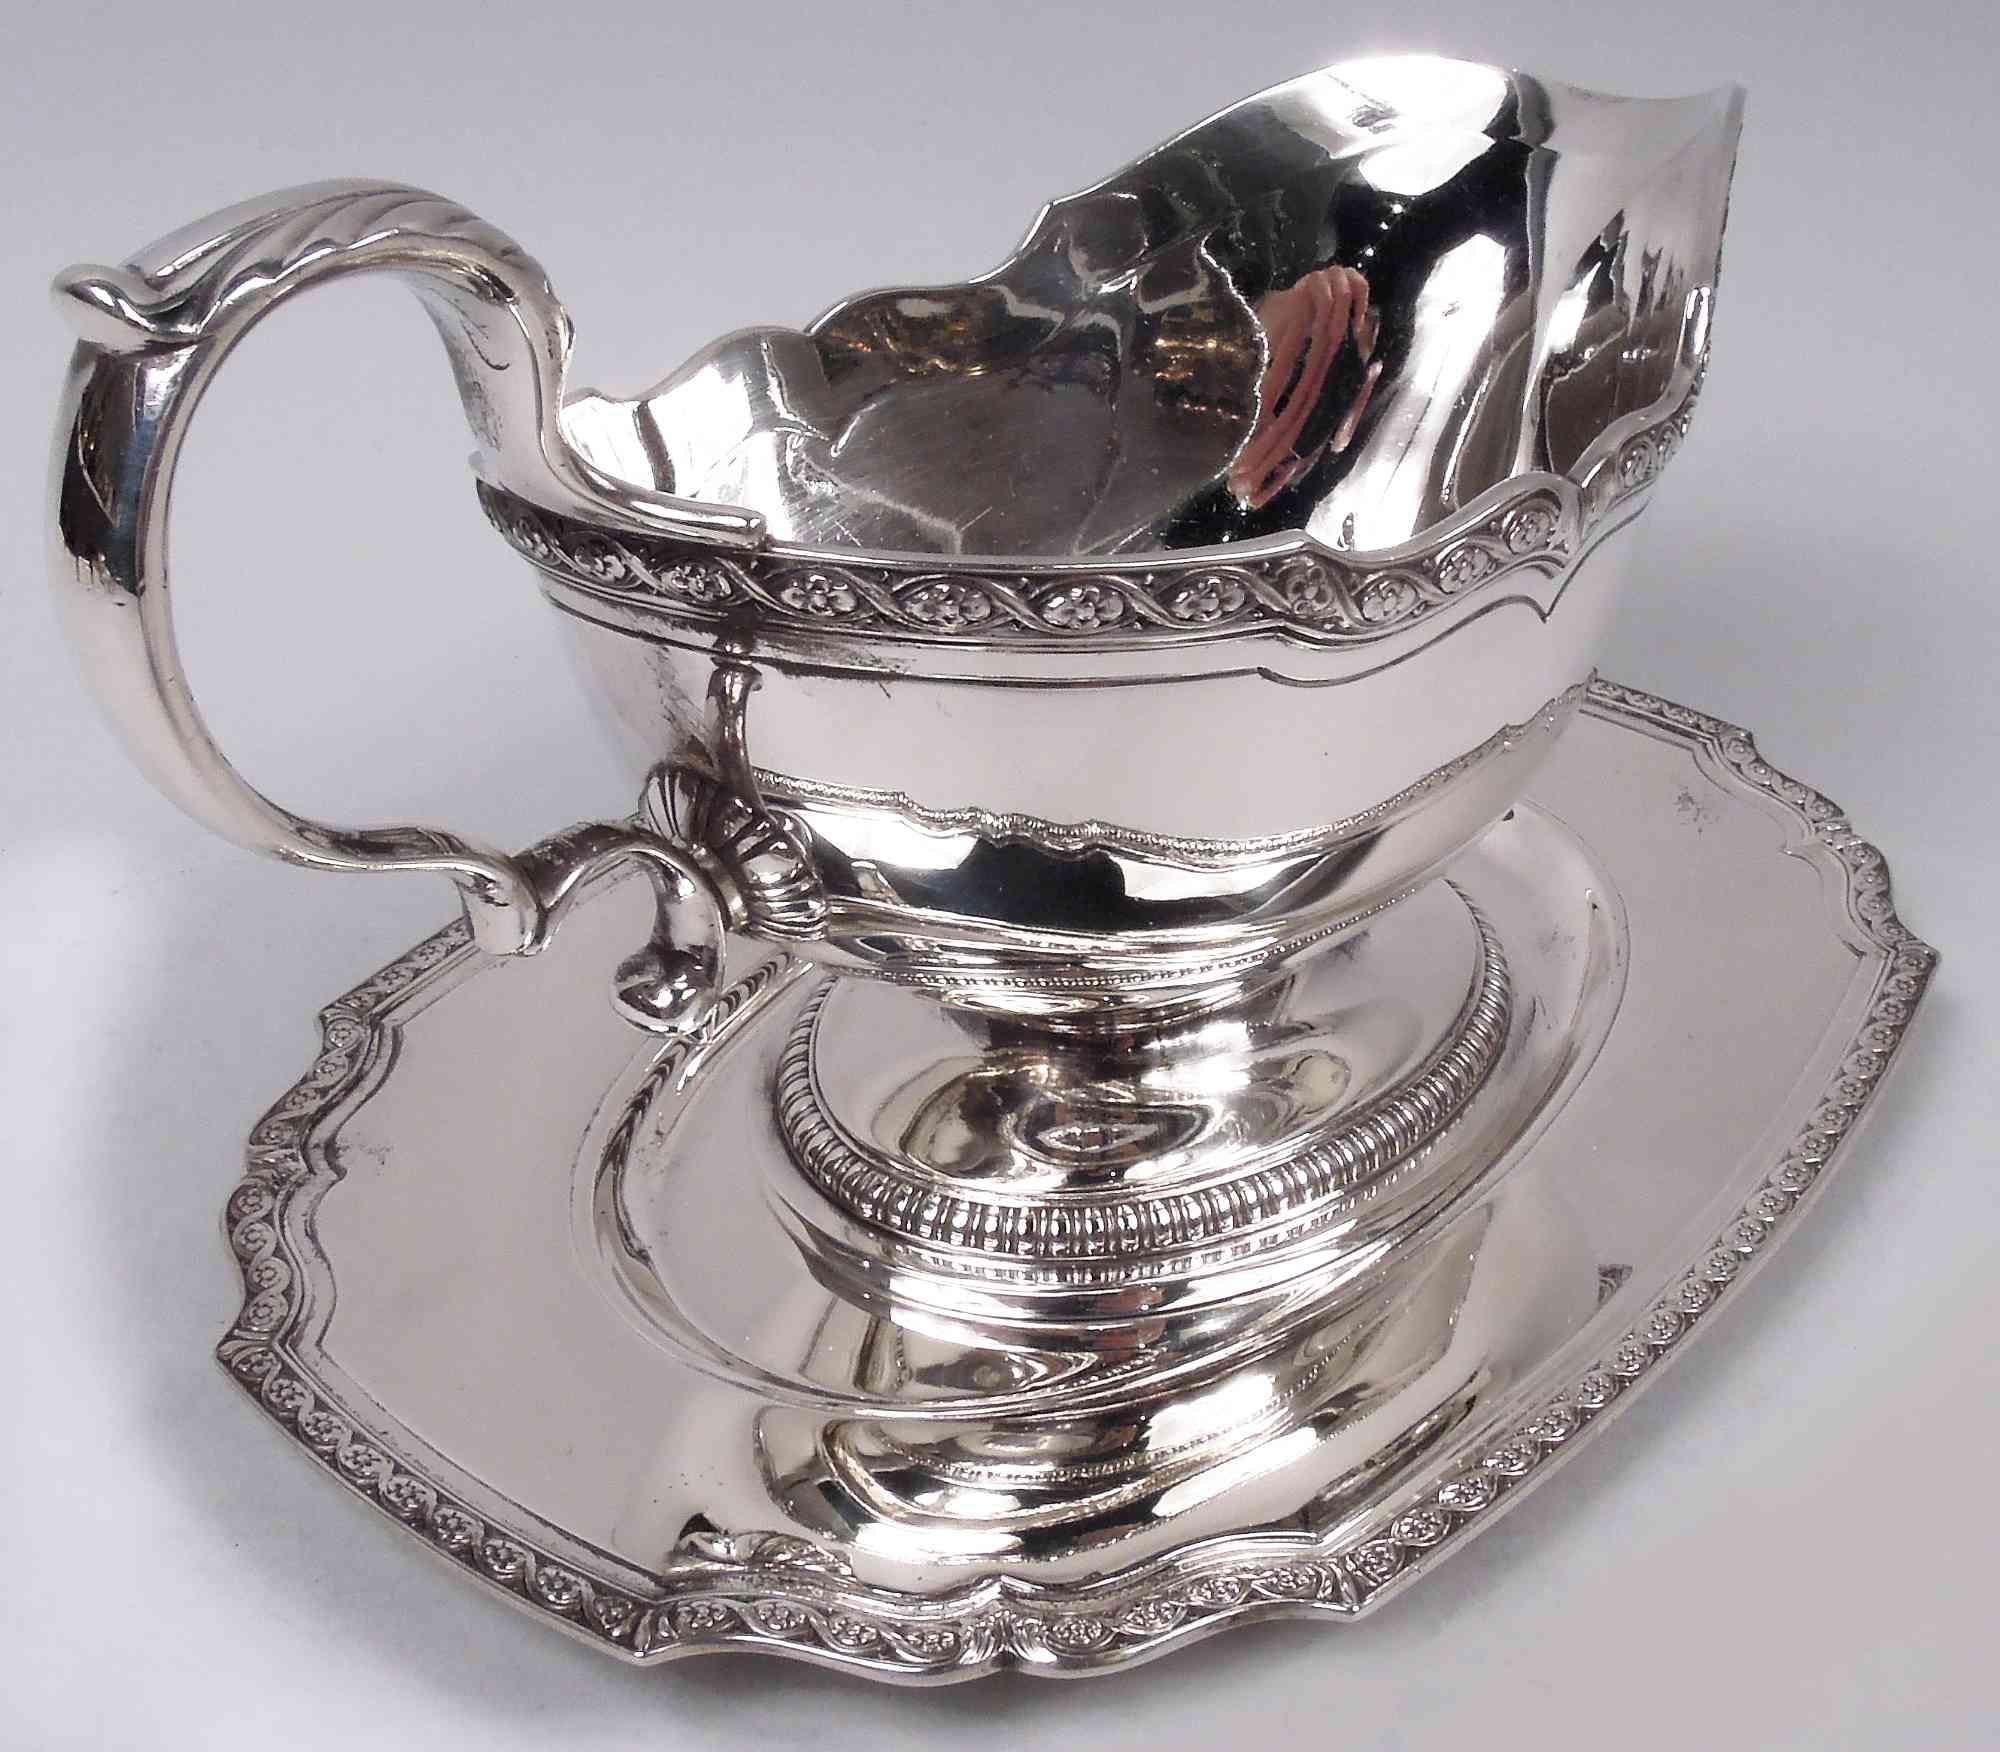 Tiffany Edwardian Classical Sterling Silver Gravy Boat on Stand For Sale 1